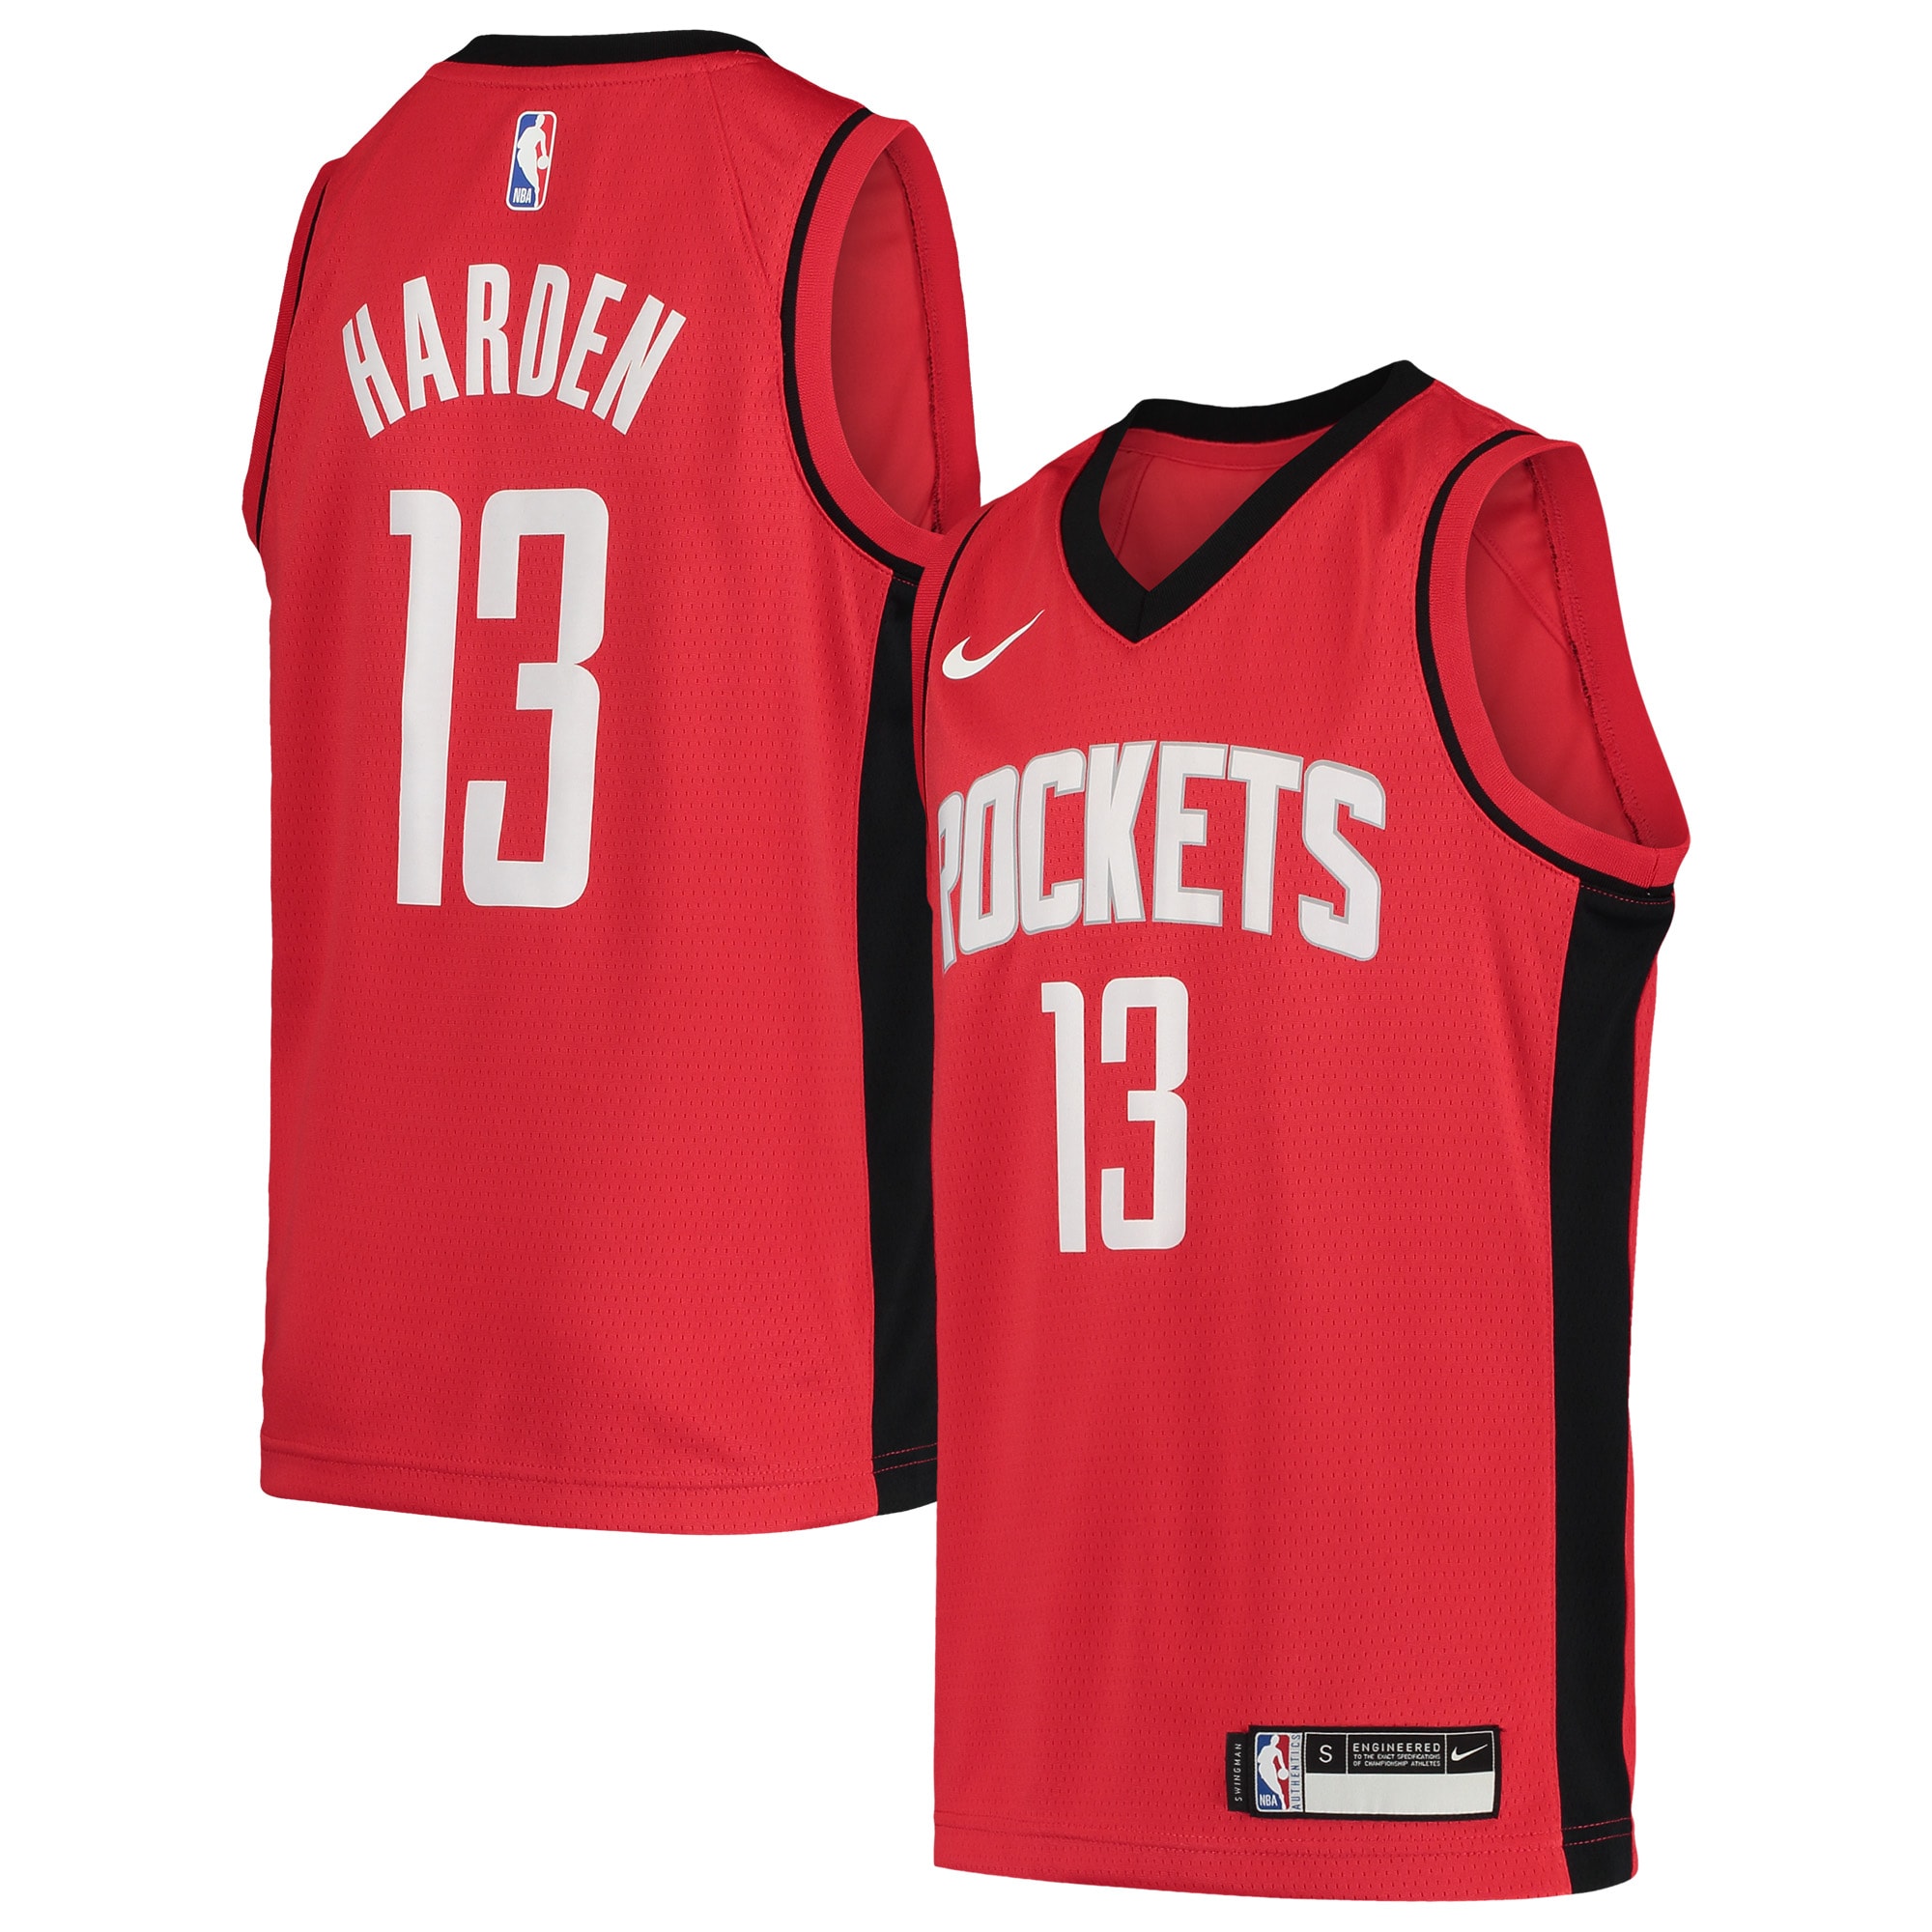 Youth Nike James Harden Red Houston Rockets Team Swingman Jersey - Icon Edition - image 1 of 3